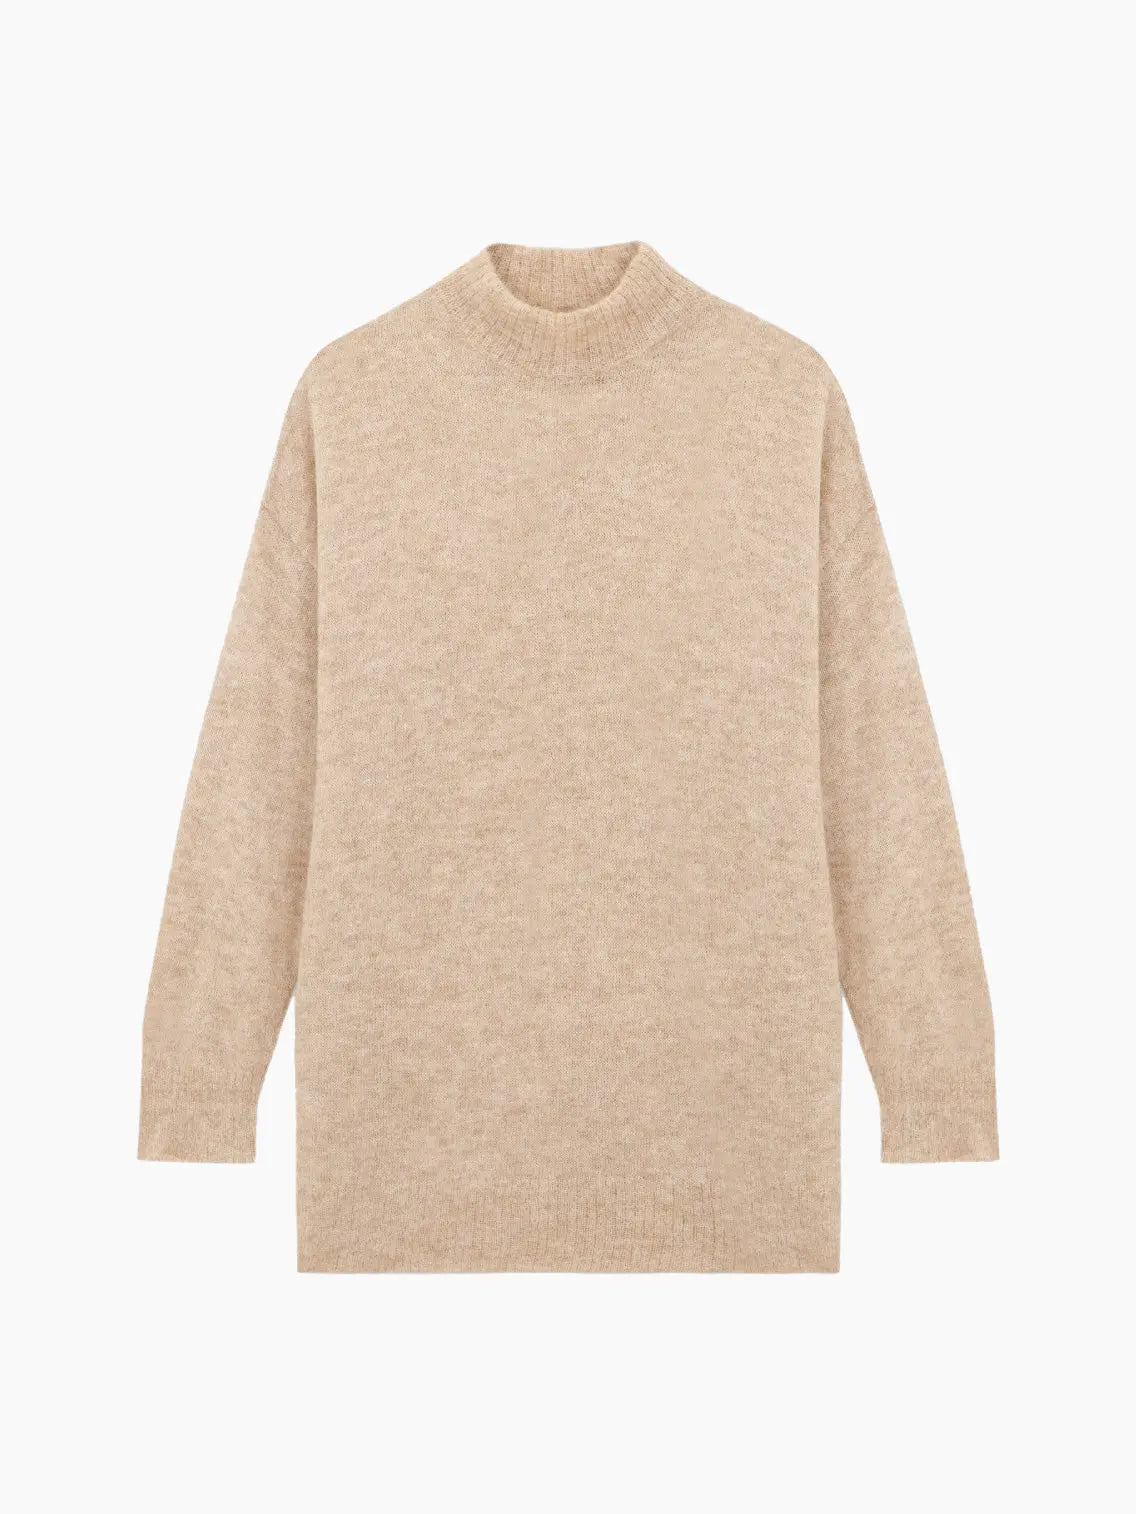 A beige, long-sleeved, knitted Suri Turtleneck Sweater Avene from Cordera. The sweater has a loose, relaxed fit and appears to be made of soft, cozy material. It is laid flat against a plain white background.